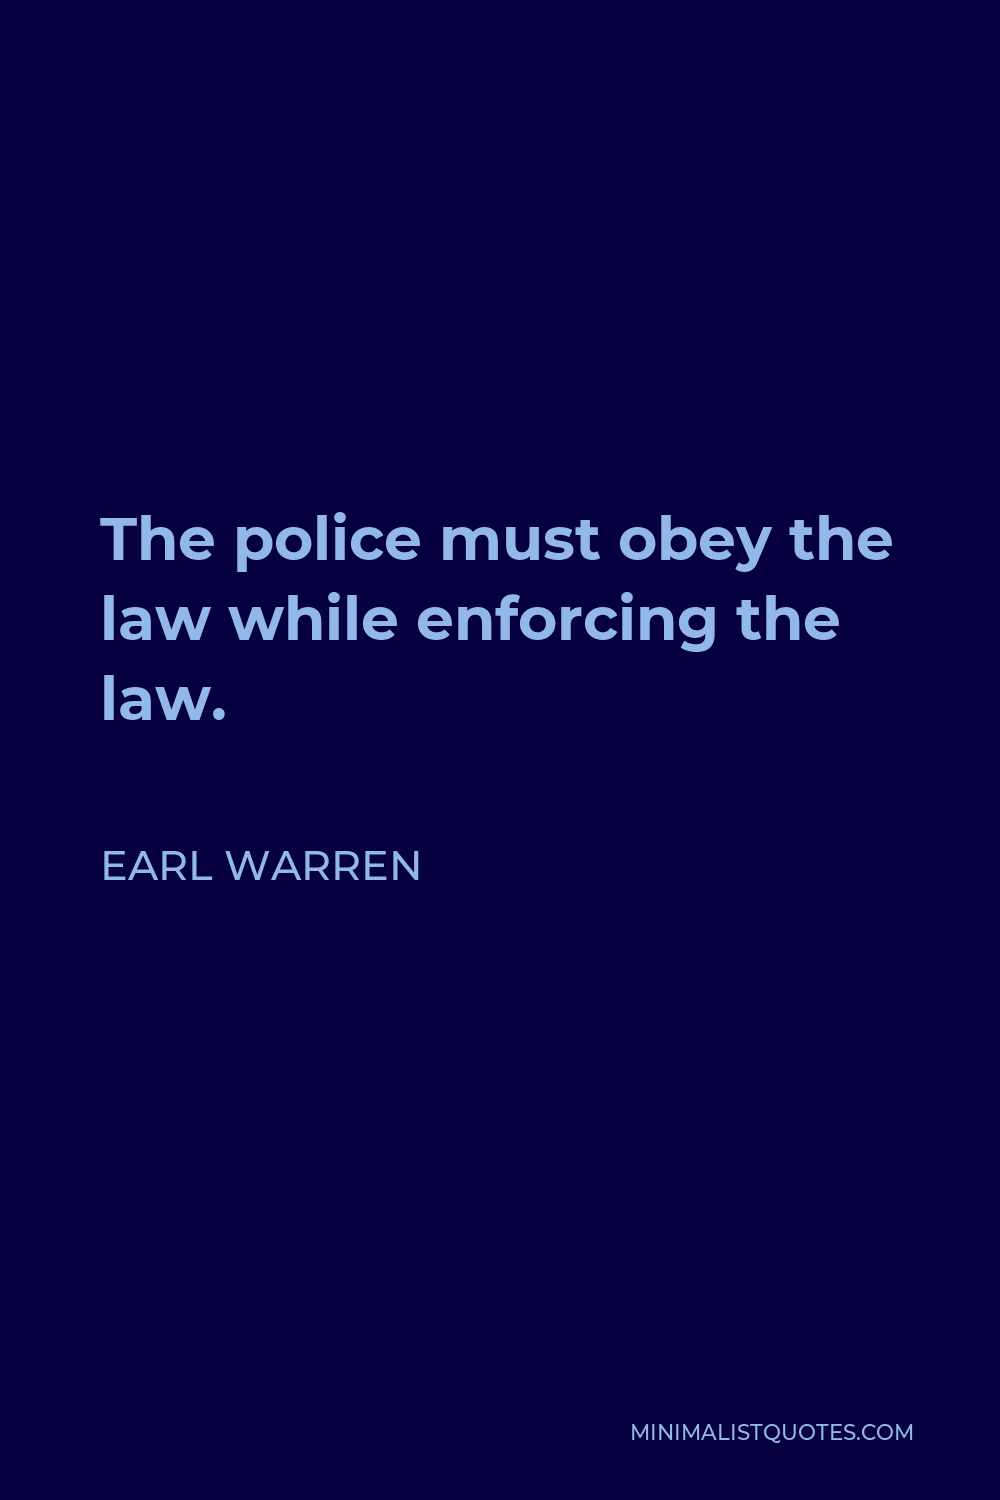 Earl Warren Quote - The police must obey the law while enforcing the law.